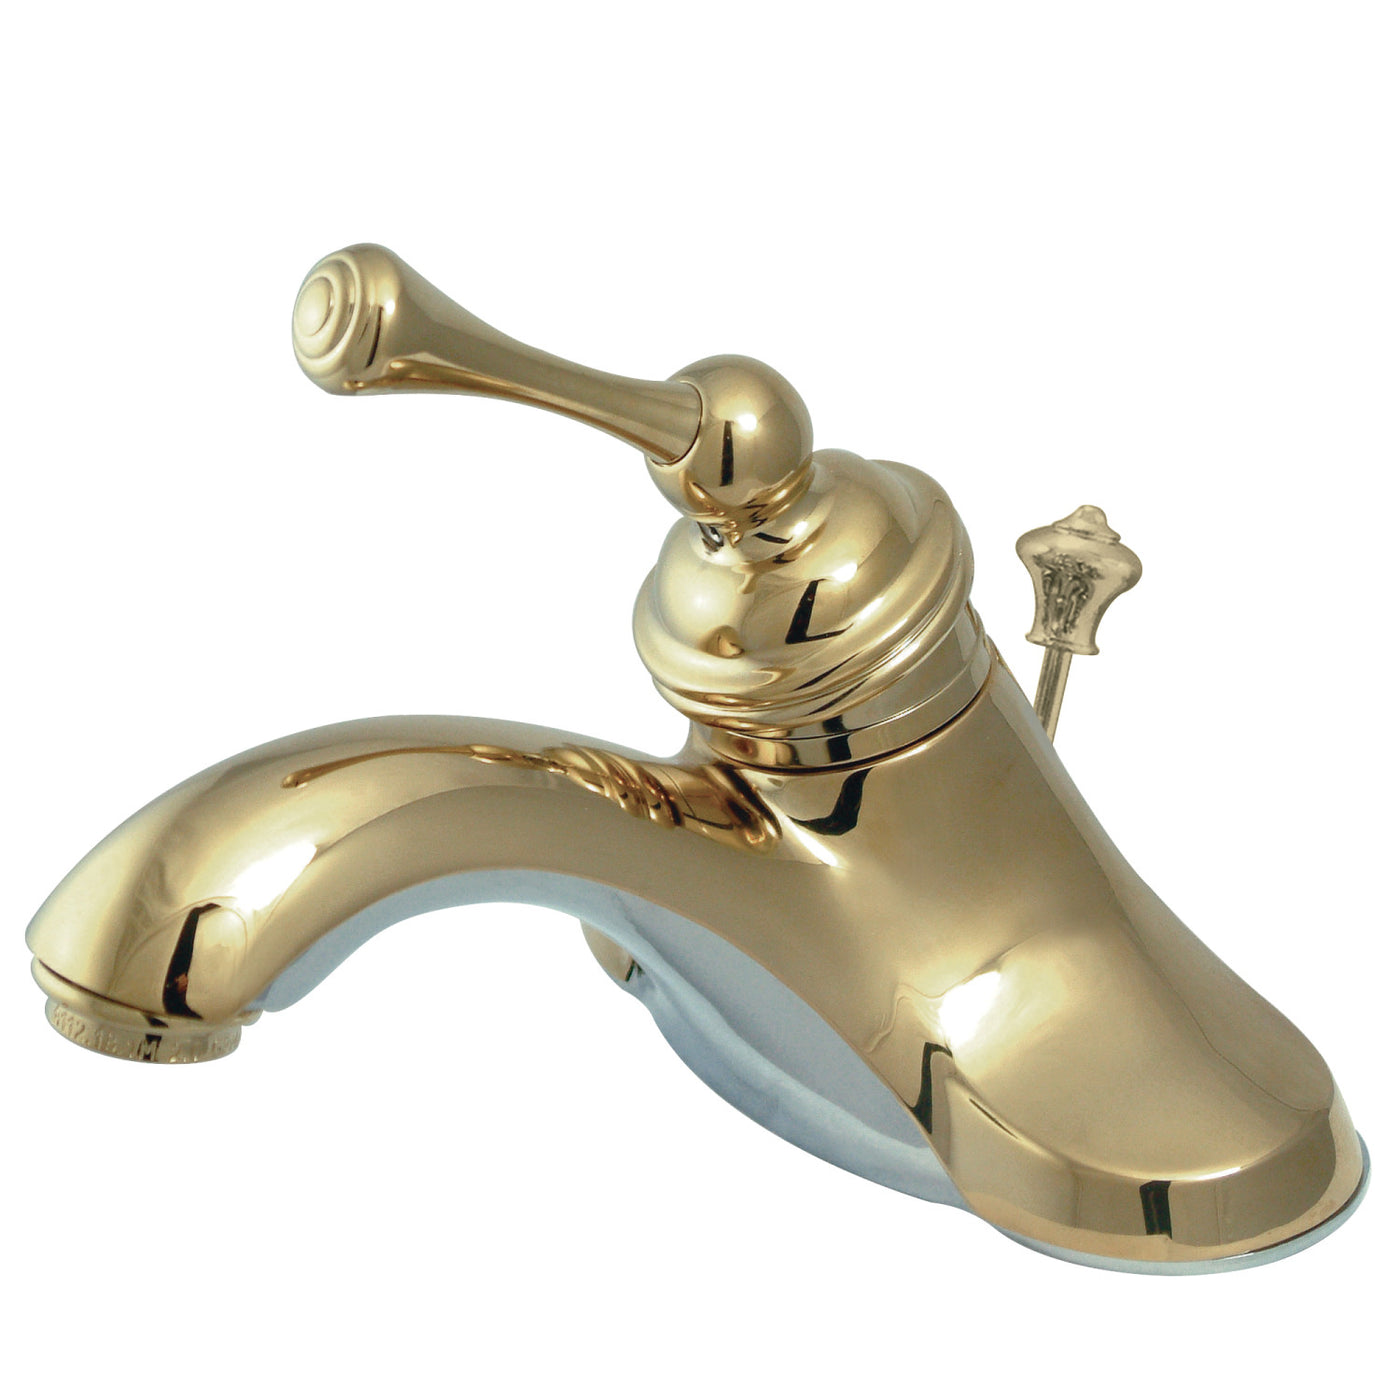 Elements of Design EB3542BL 4-Inch Centerset Bathroom Faucet, Polished Brass